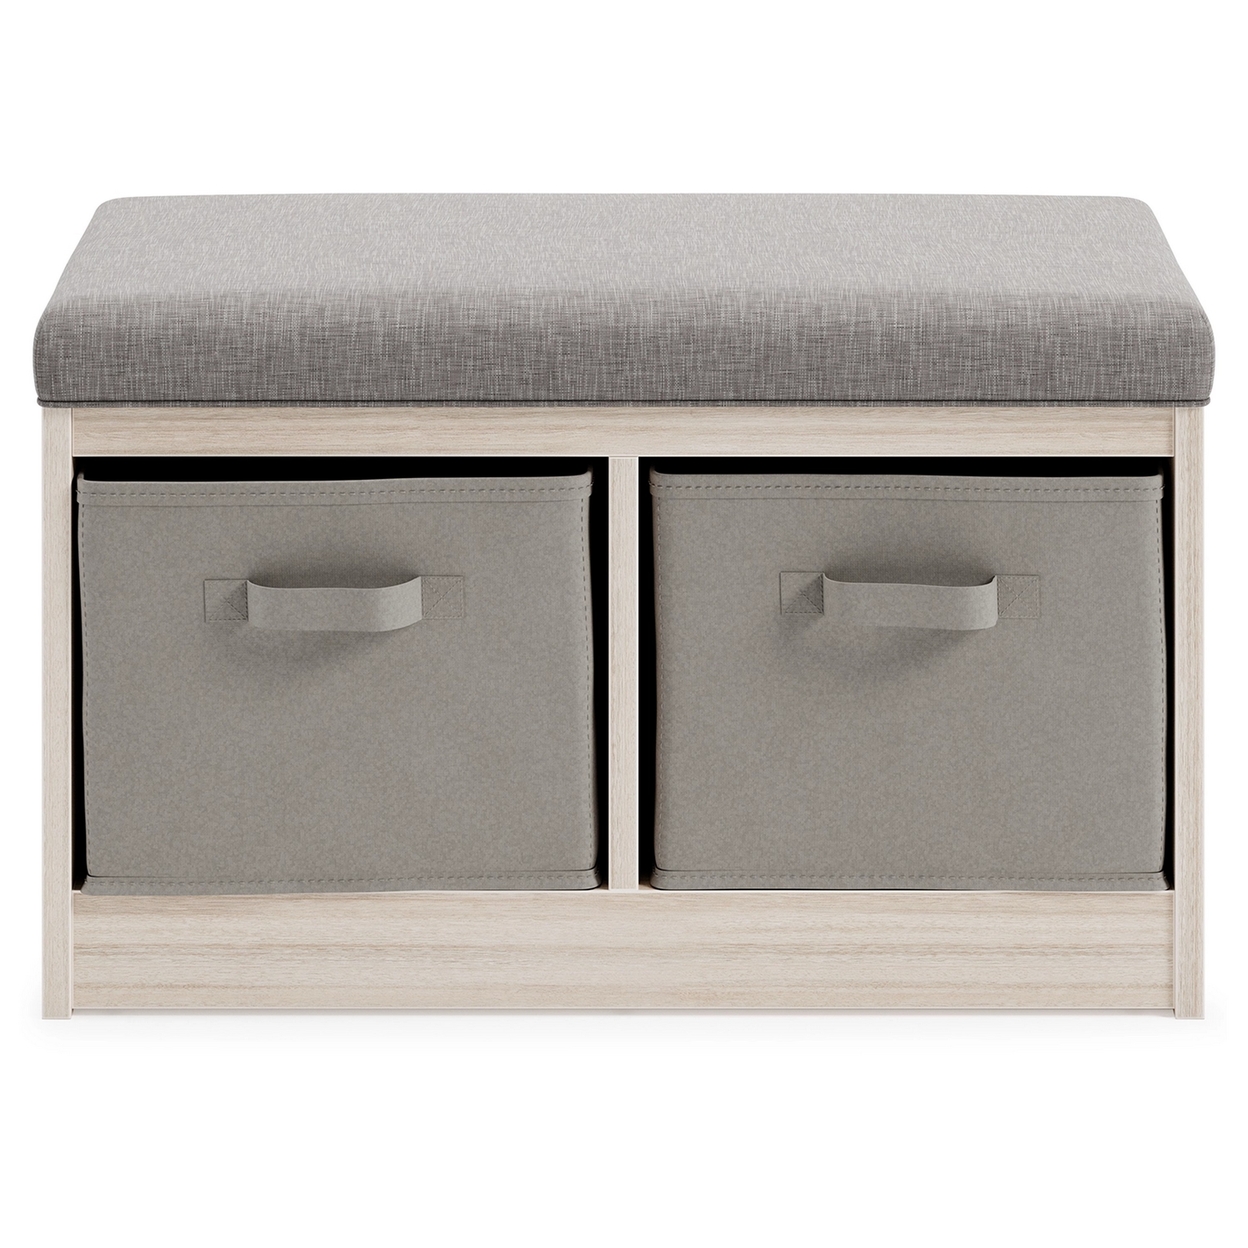 Storage Bench With Cushioned Top And 2 Fabric Baskets, Gray- Saltoro Sherpi